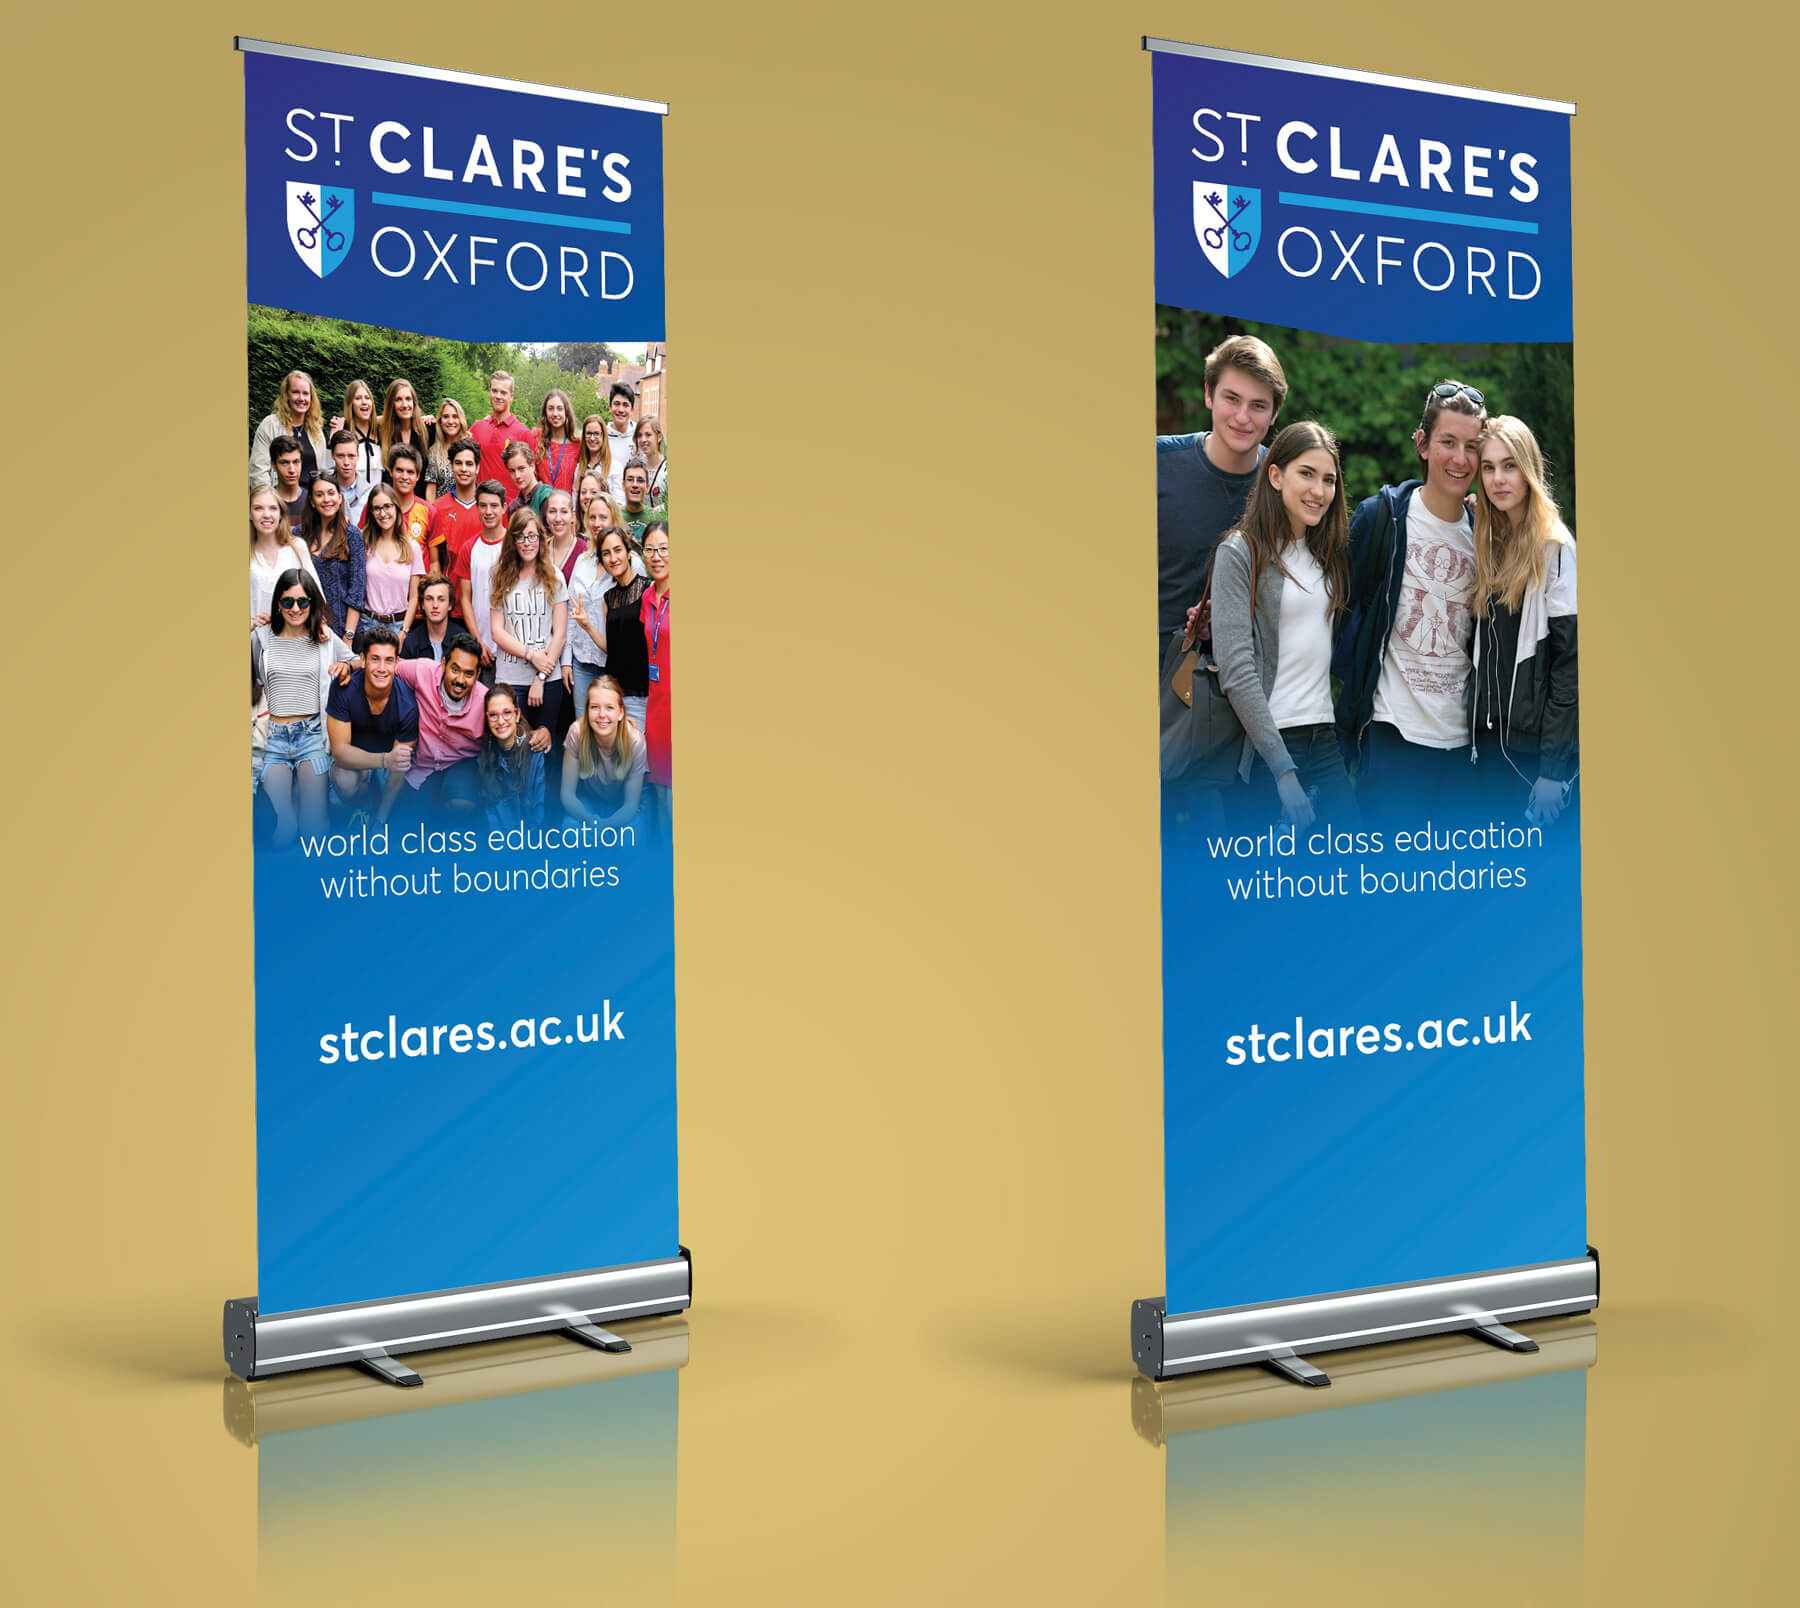 Pull up banners for St Clare's Oxford